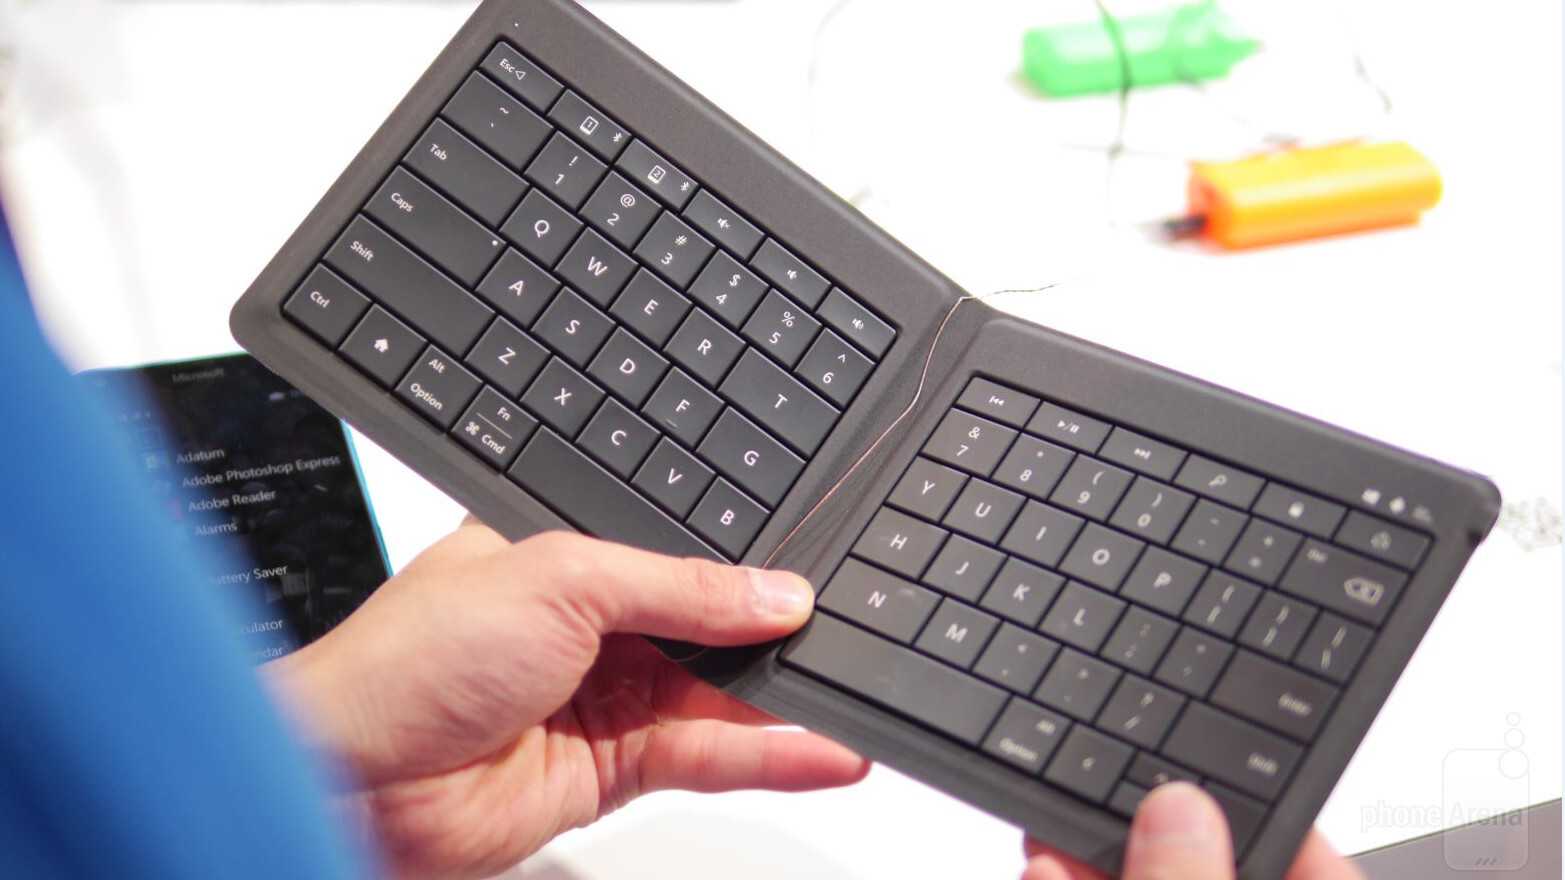 Hands on with microsoft's universal foldable keyboard | tom's hardware